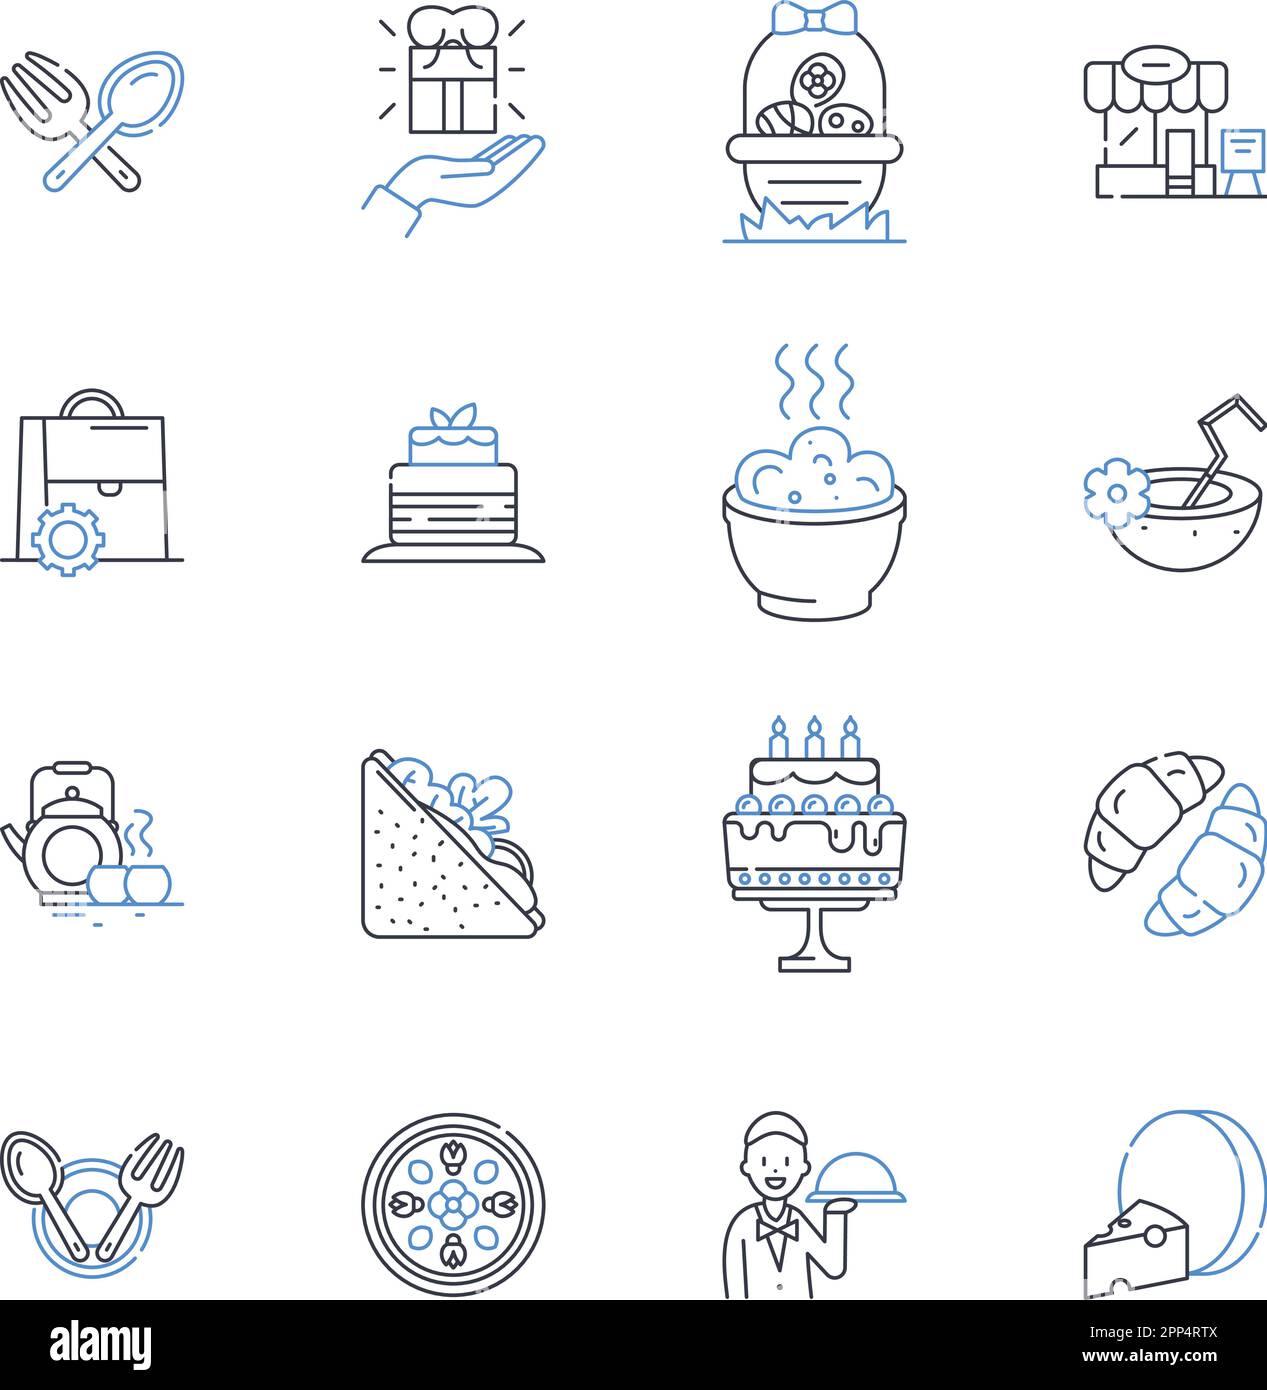 Bread bakery line icons collection. Yeast, Flour, Dough, Crusty, Fresh, Sourdough, Pastry vector and linear illustration. Rye,Artisan,Baguette outline Stock Vector